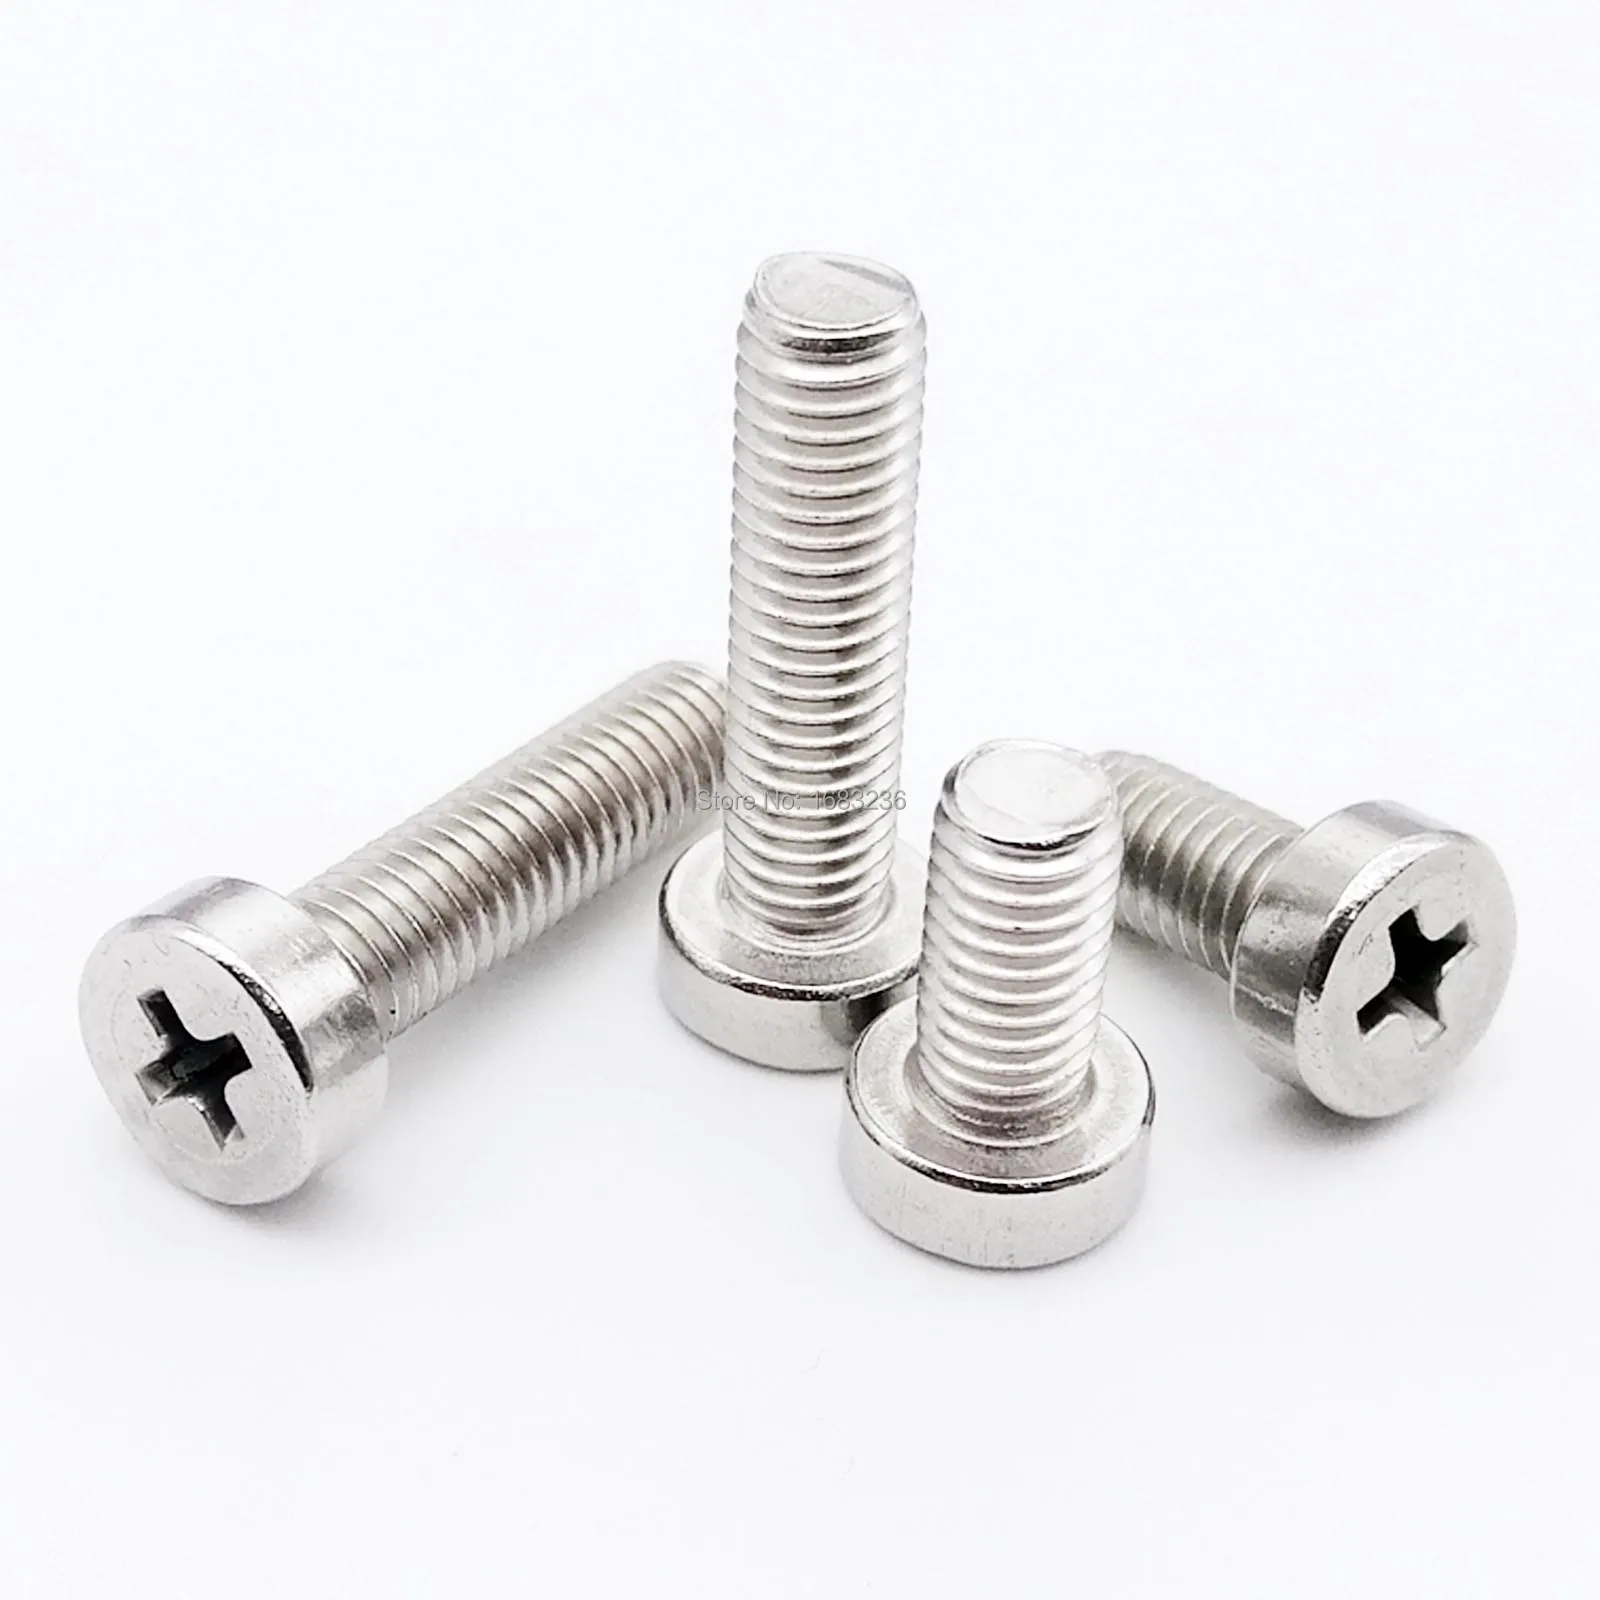 Pan Round Head Phillips Machine Screws Bolts 304 A2 Stainless Steel M5*6-100mm 